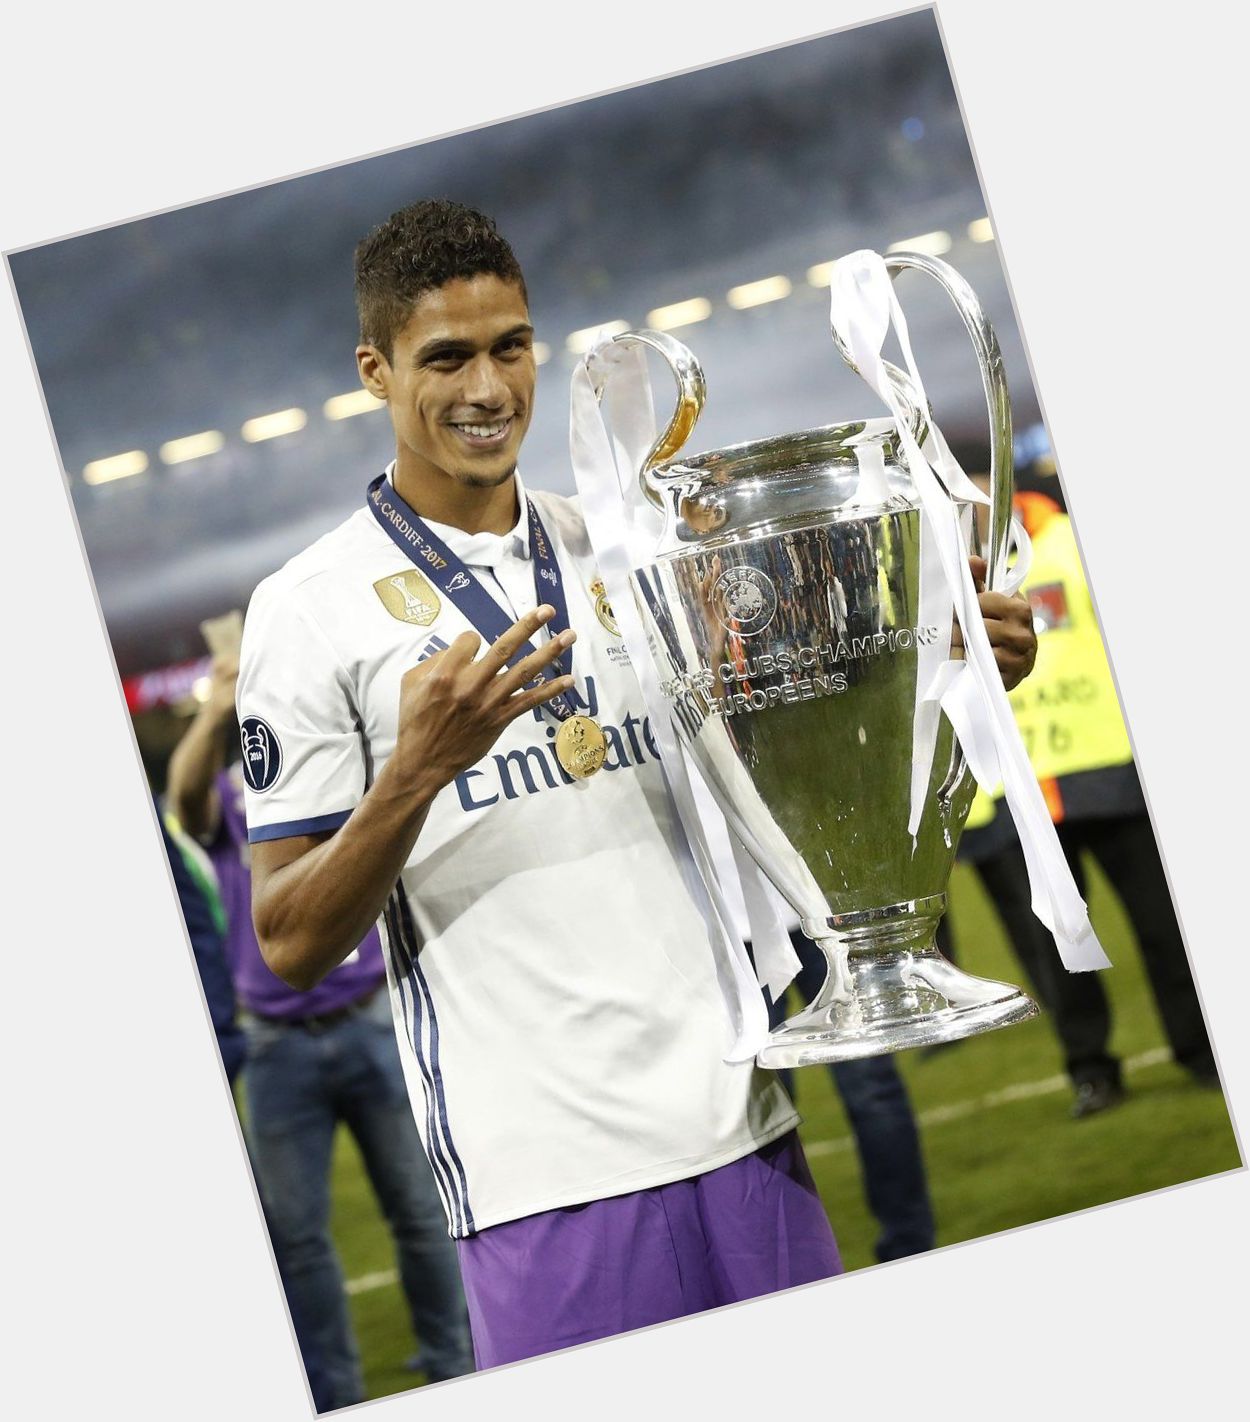 Happy birthday to Real Madrid defender Raphael Varane. 25 years old, 3 Champions League titles, not bad at all! 